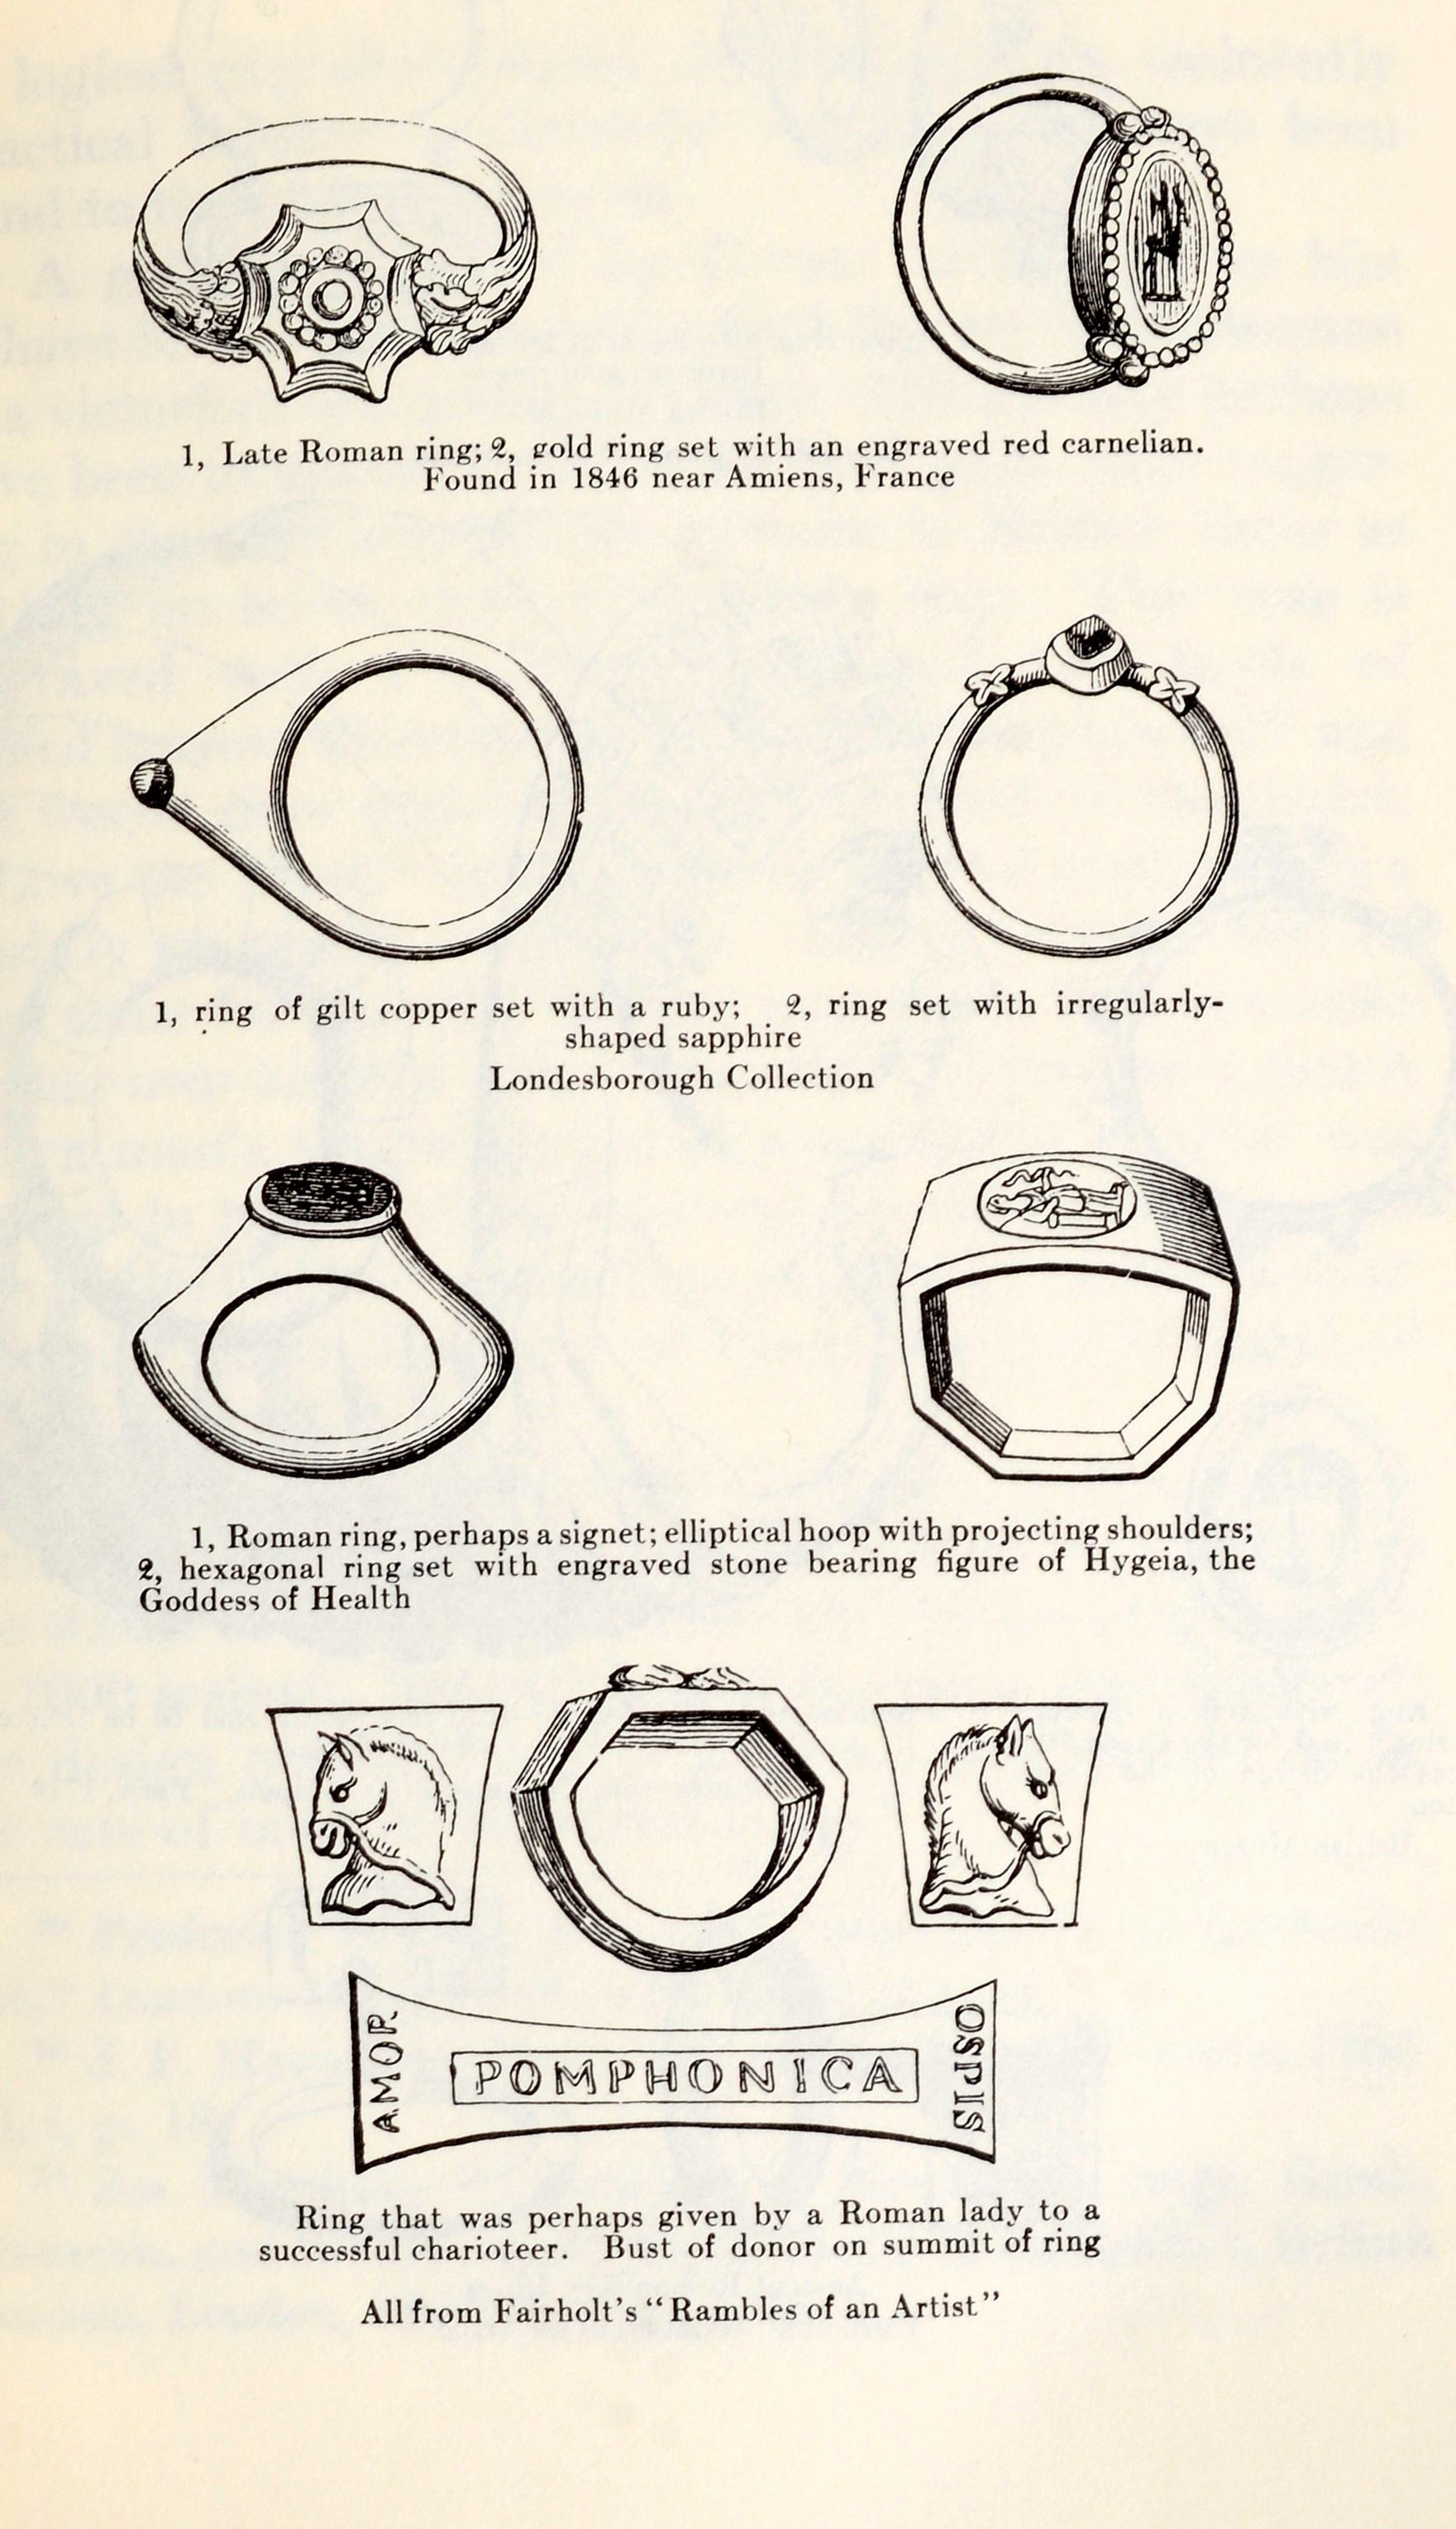 Rings for the Finger by George Frederick Kunz. Softcover, Published by Dover, New York, 1974. There is probably no item that is so common to almost all cultures and ages of man, yet so frequently overlooked, as rings. Nearly everyone wears (or has